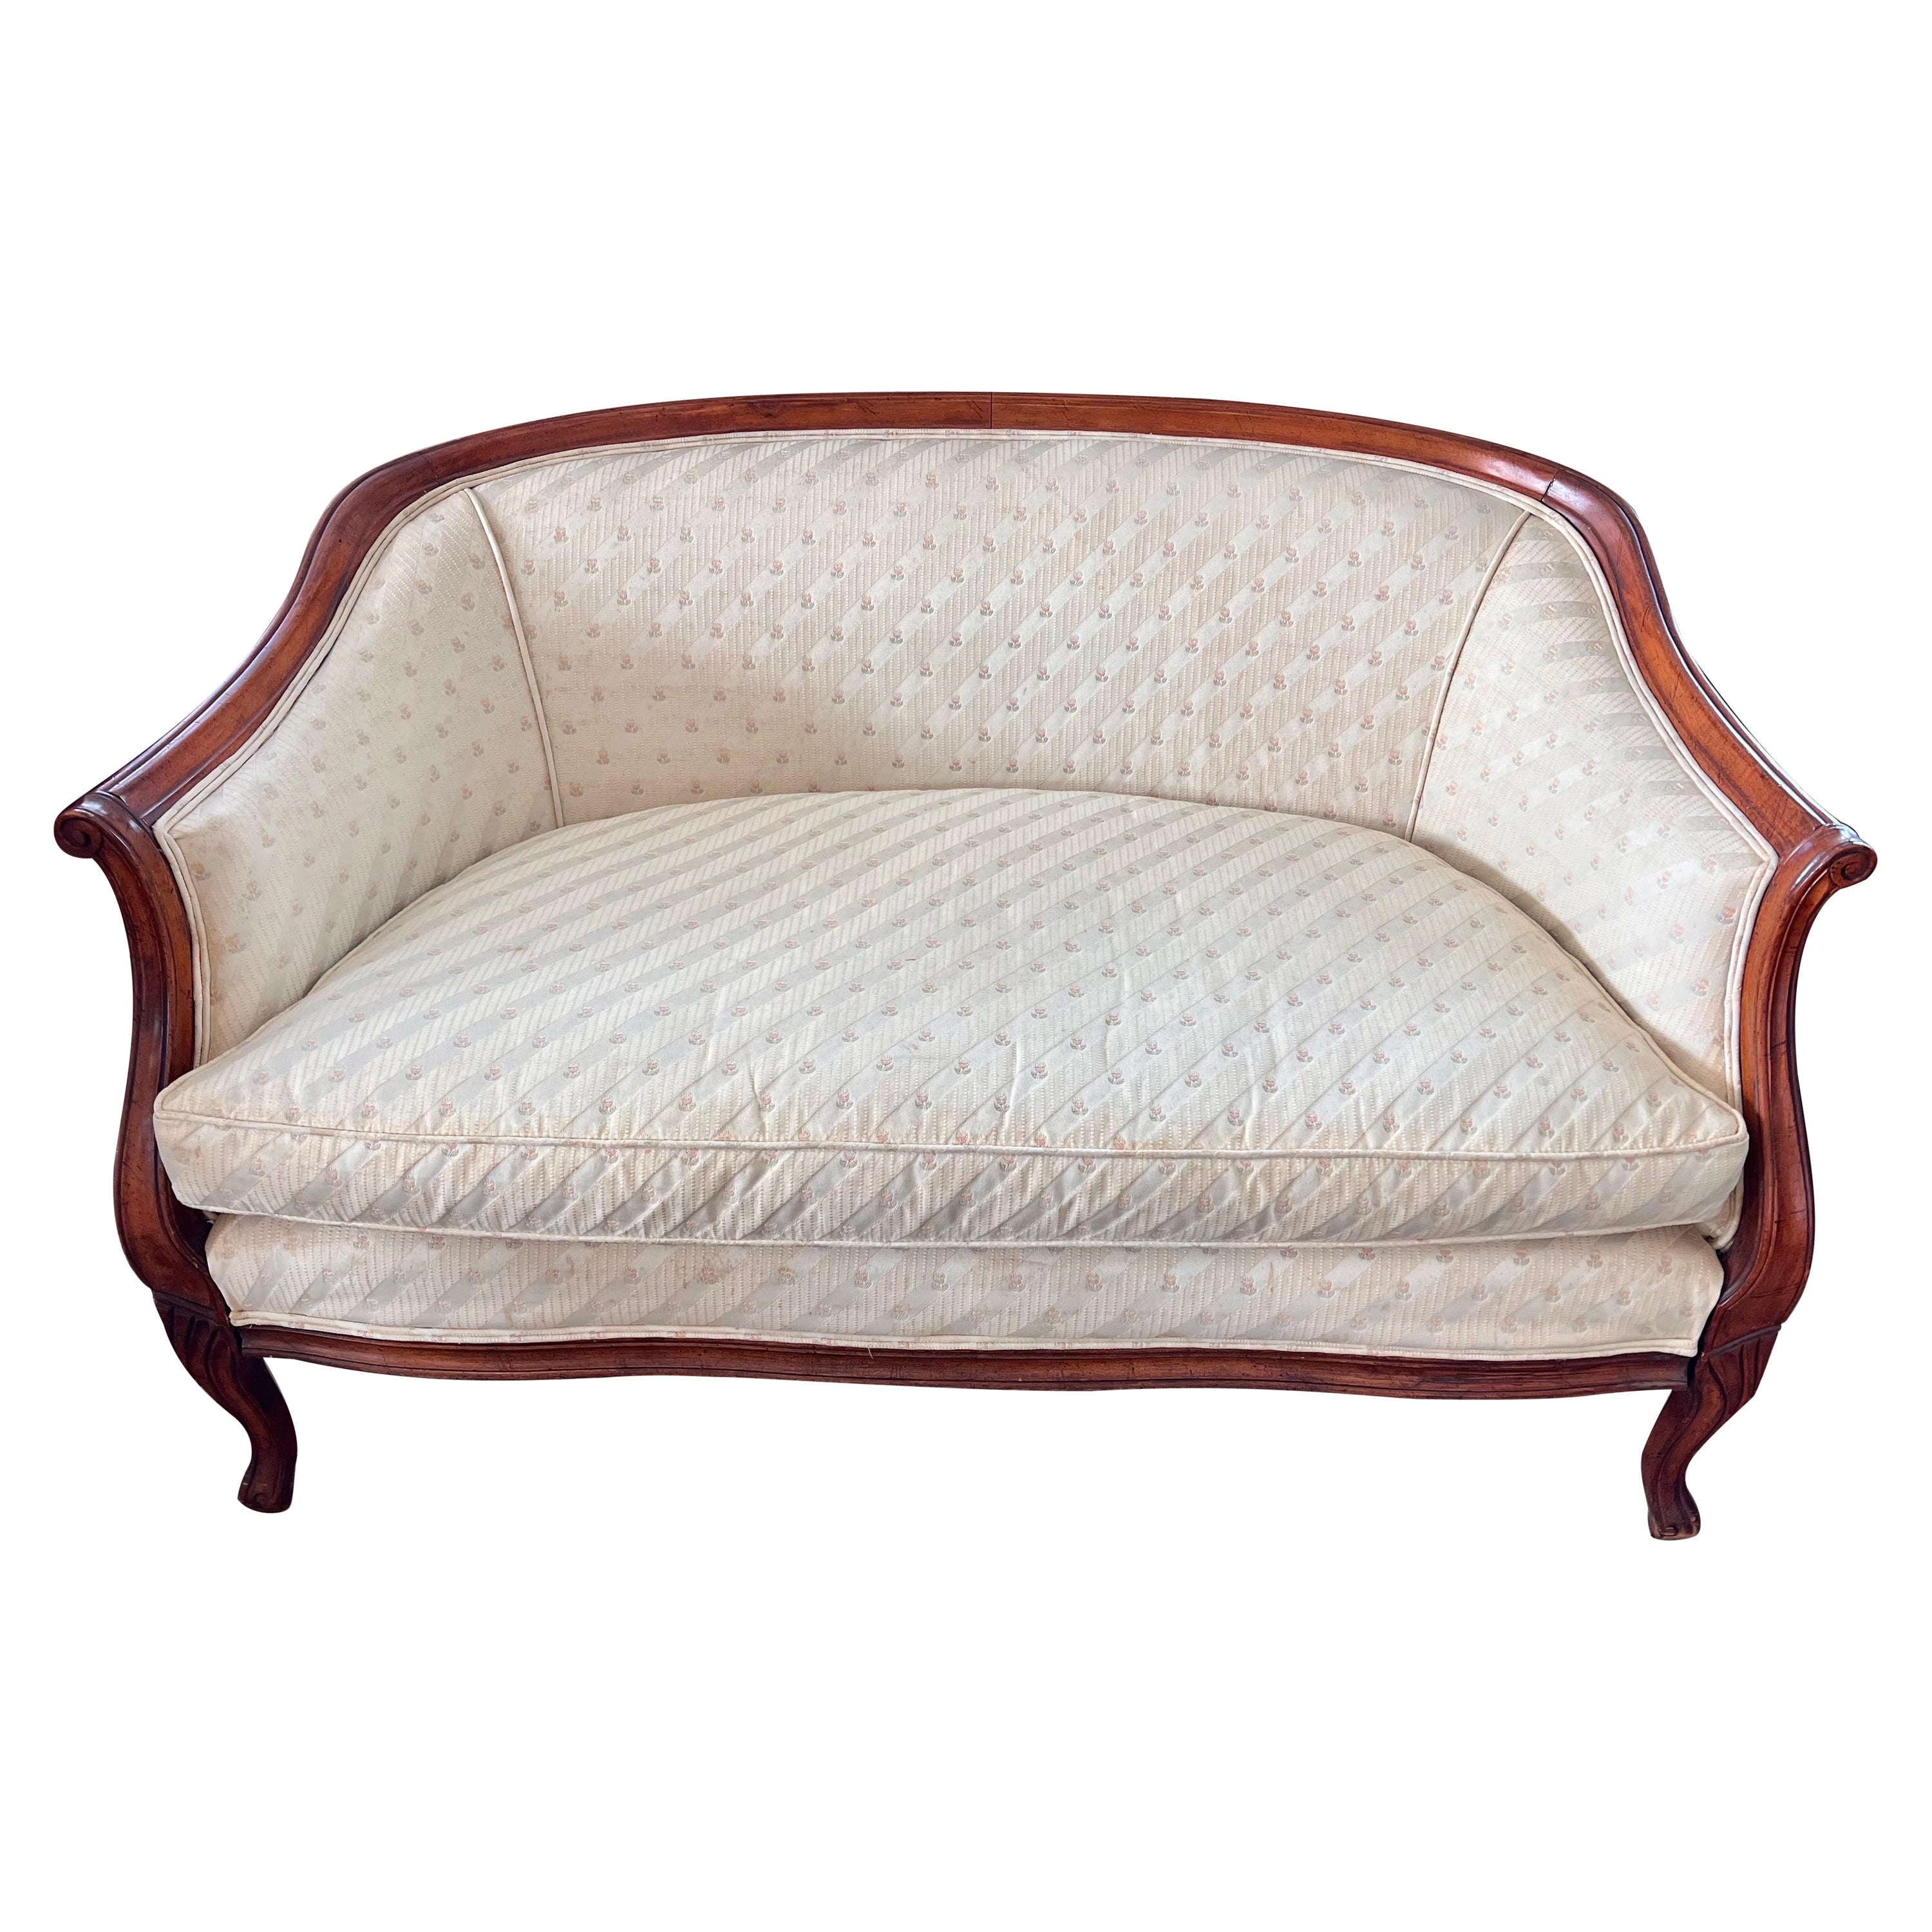 Antique French Louis XVI Mahogany Upholstered Settee Loveseat